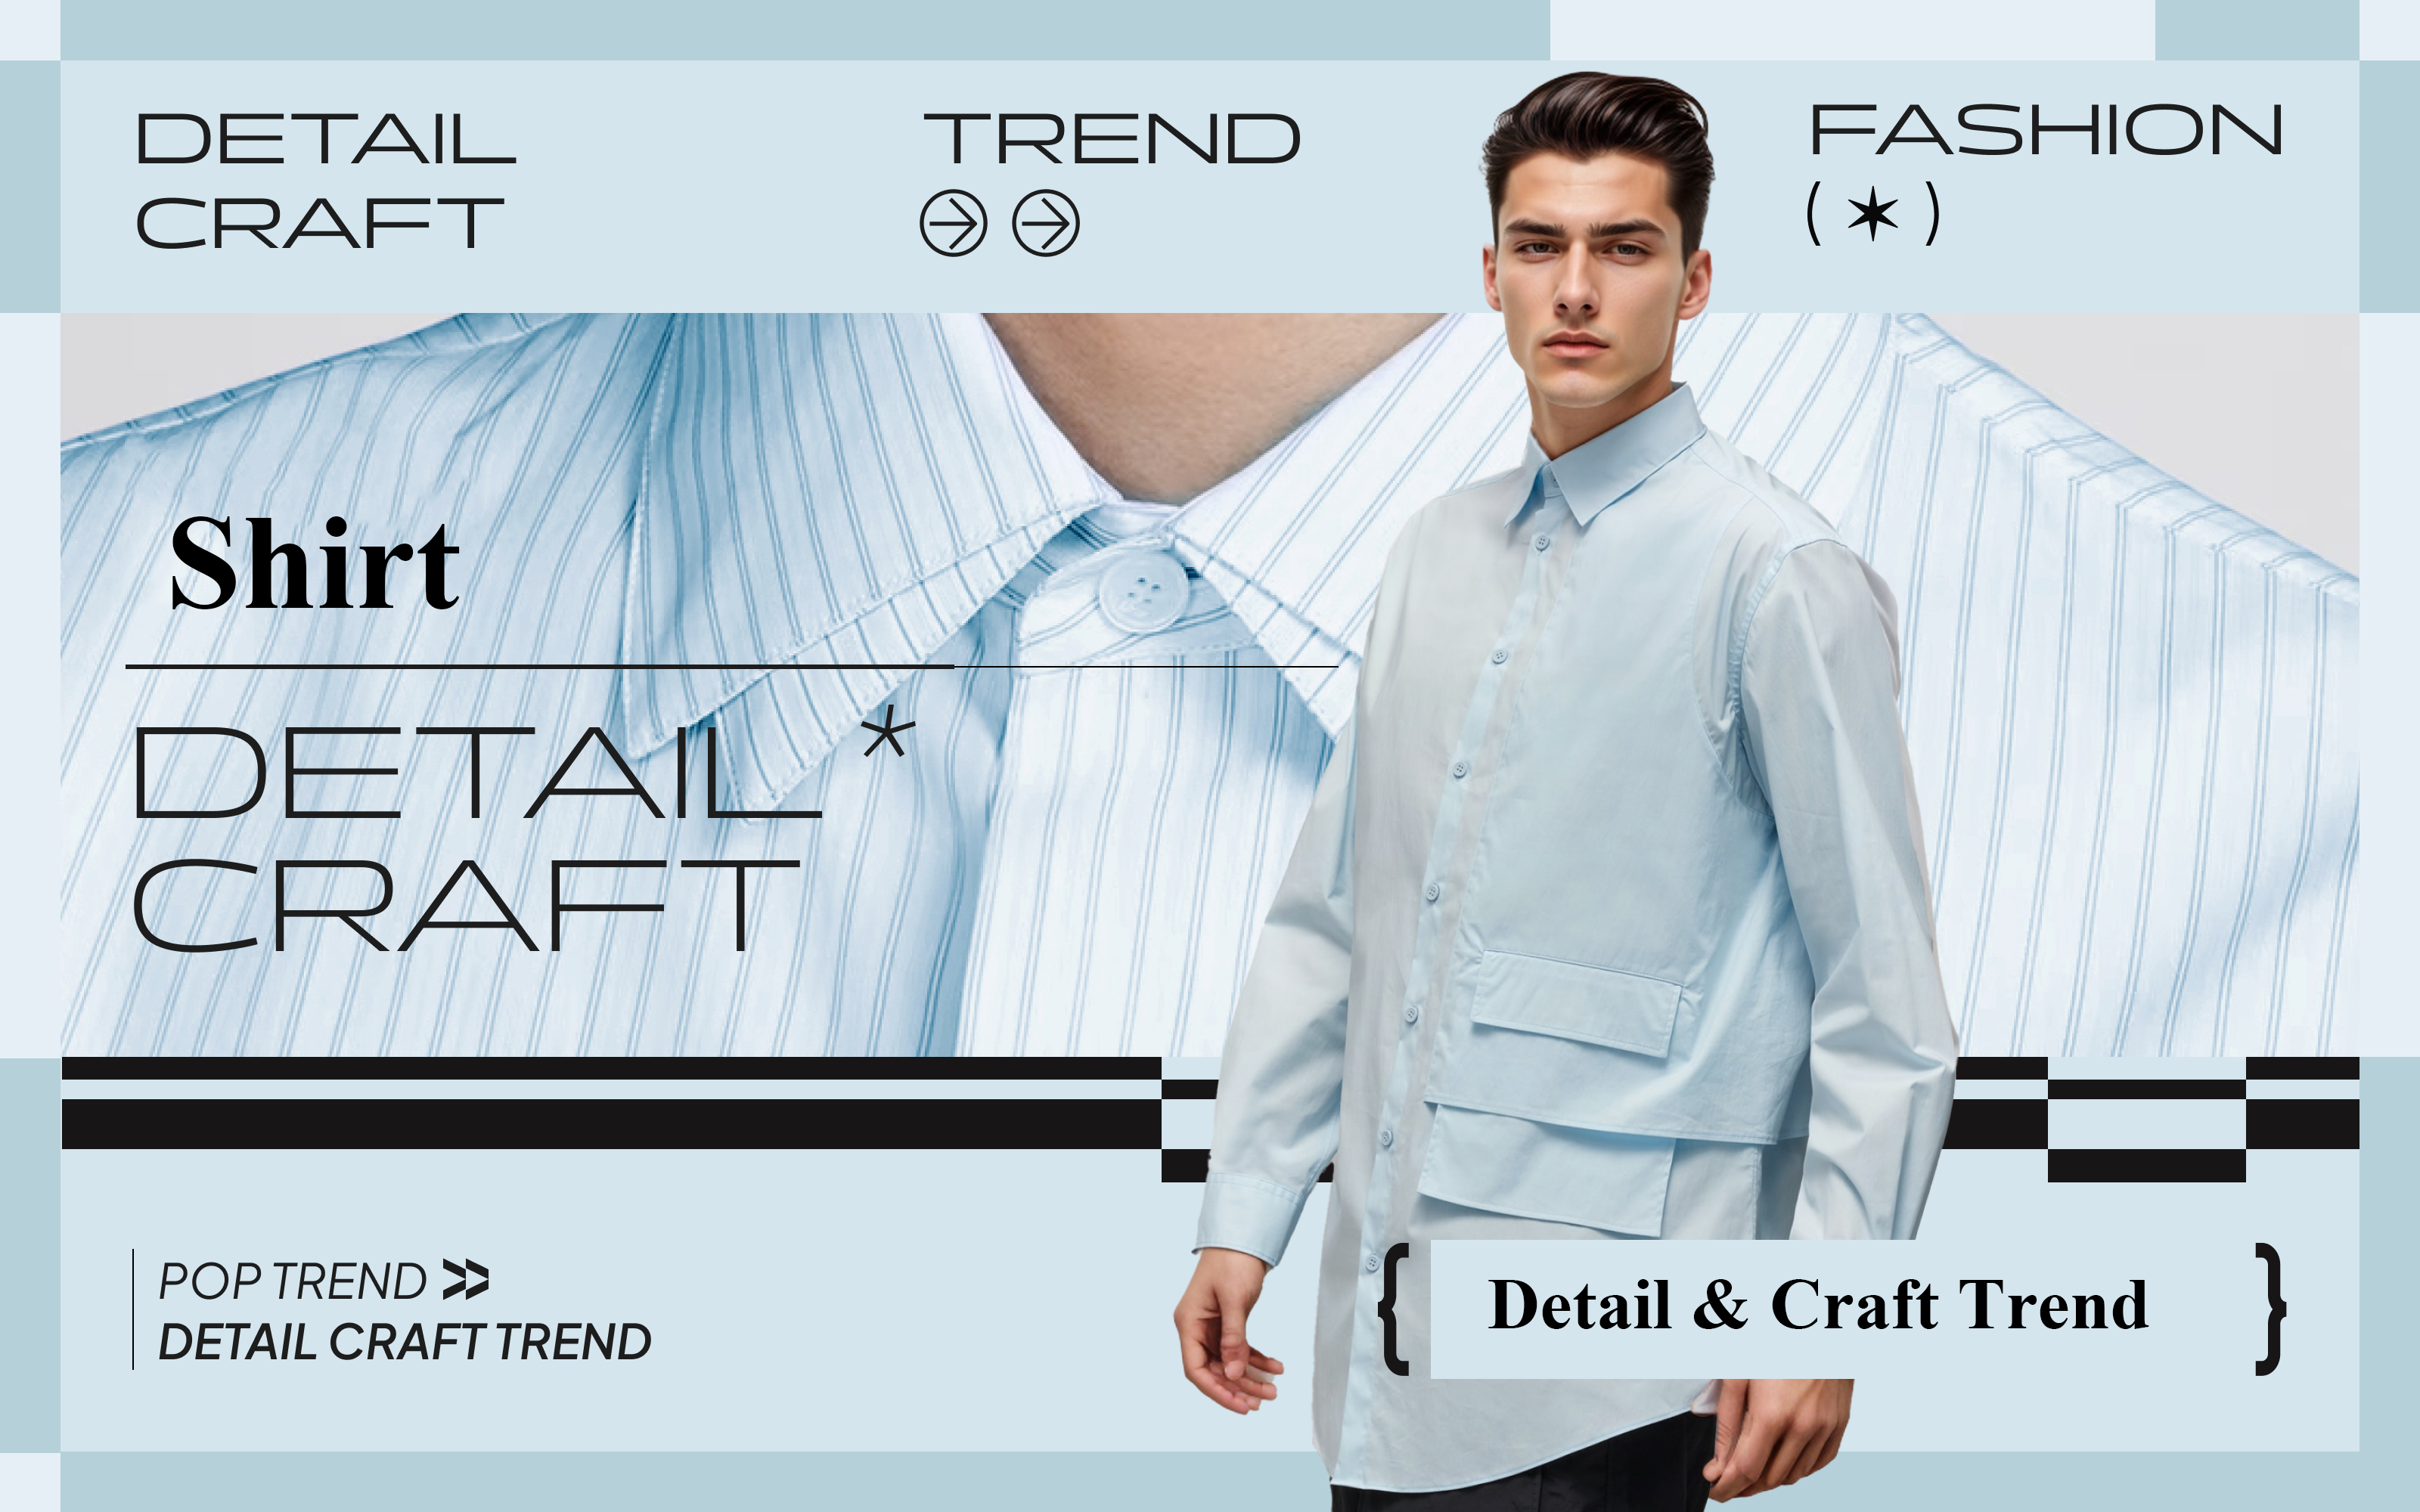 Urban Leisure -- The Detail & Craft Trend for Men's Shirt